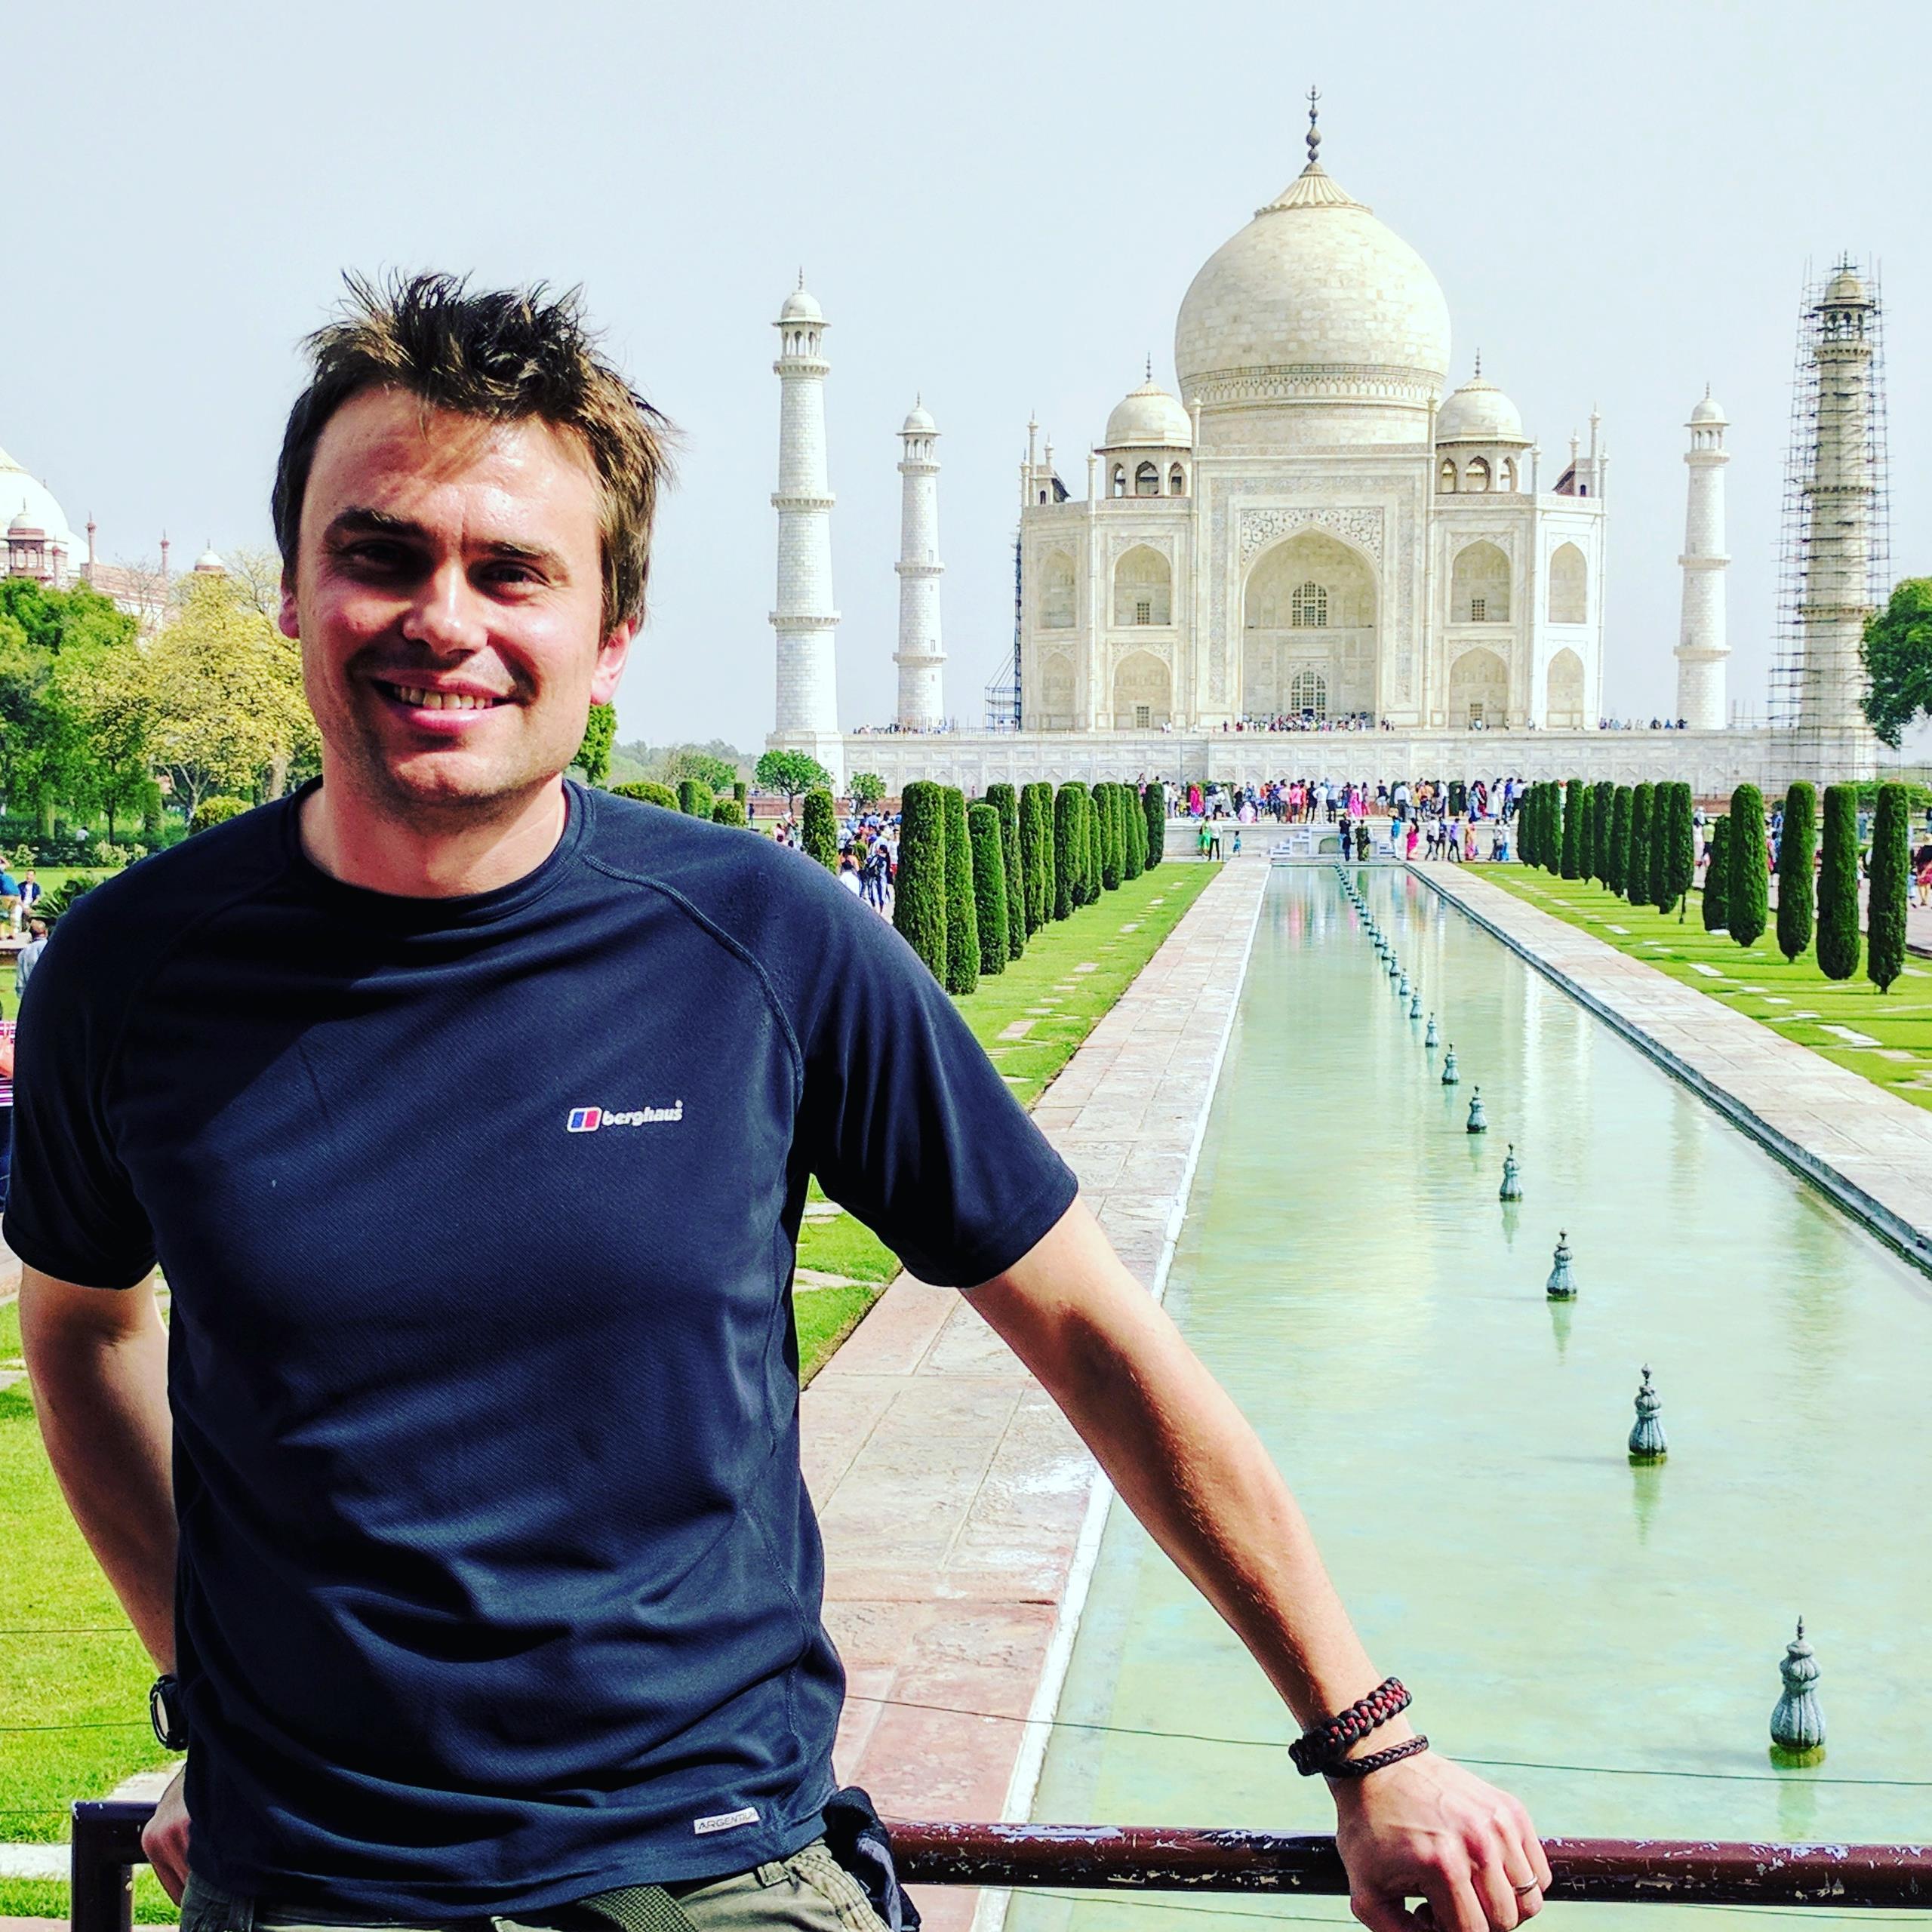 James visiting the Taj Mahal while on site in India in April 2017